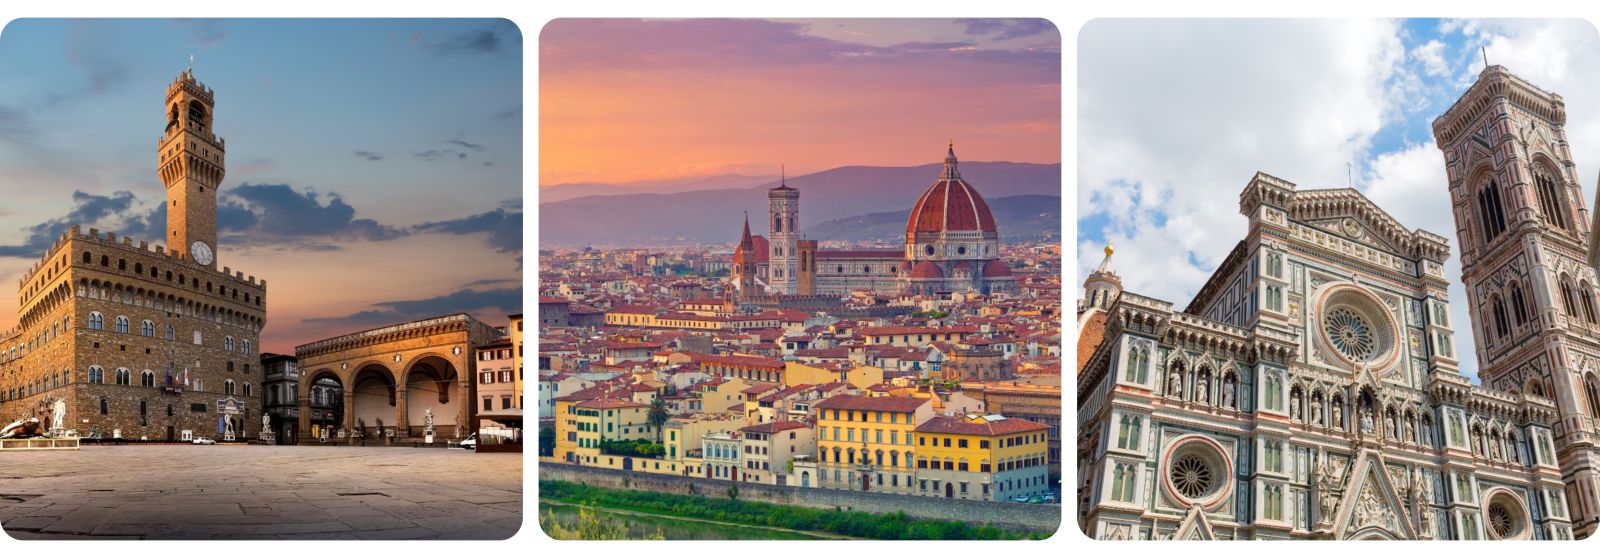 Northern Italy by train - Florence